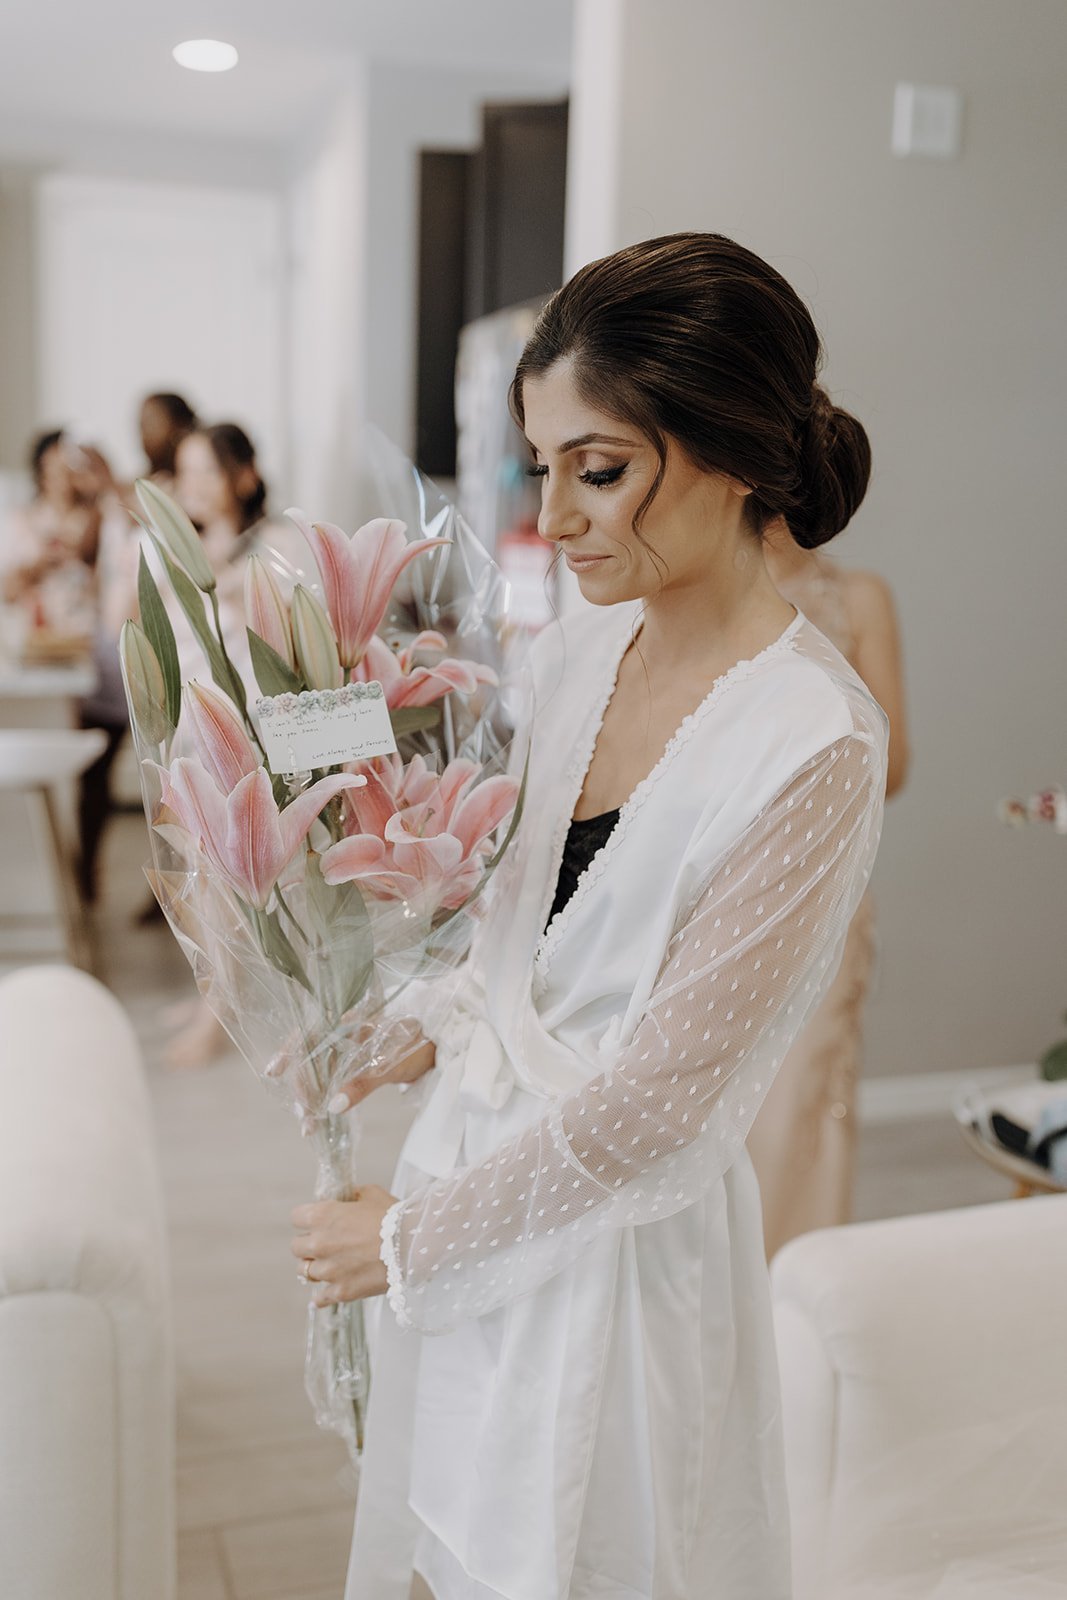 Bride holding pink lilies during getting ready morning 